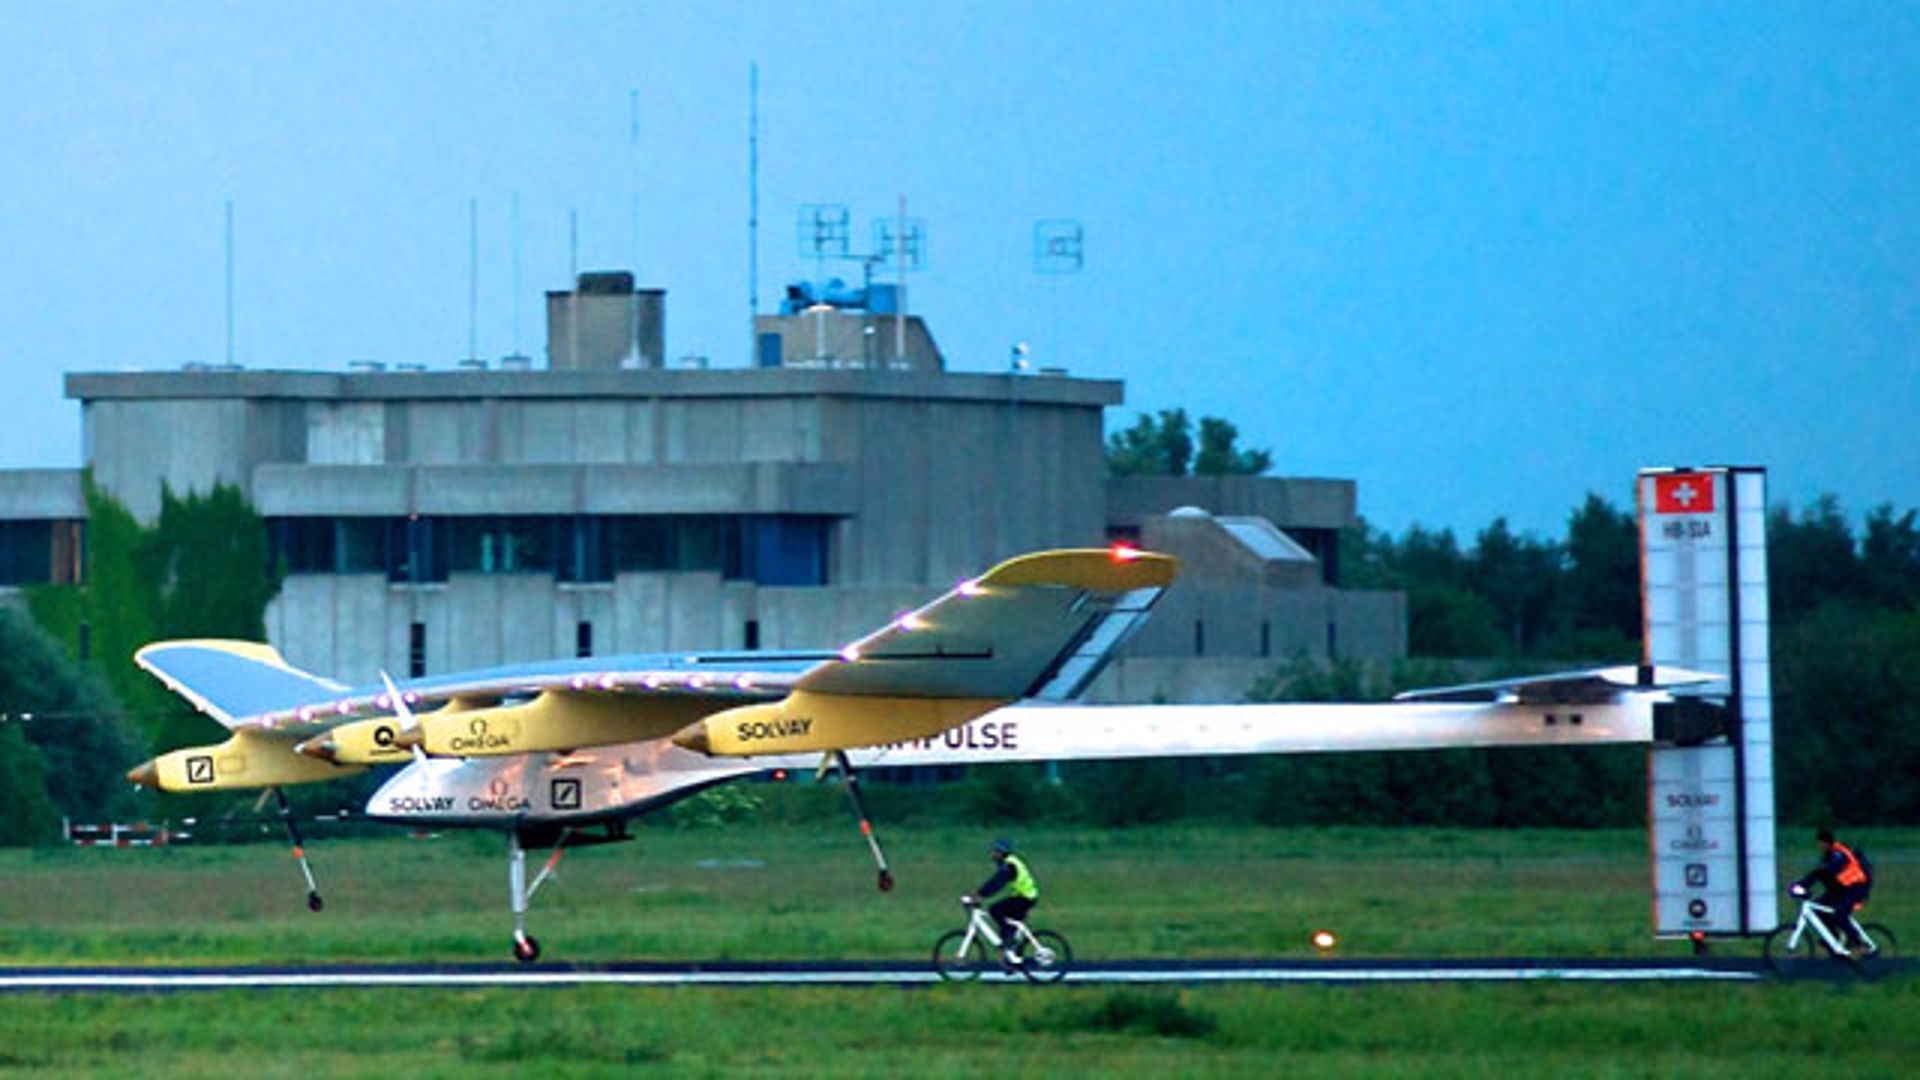 Great Electric Airplane Race